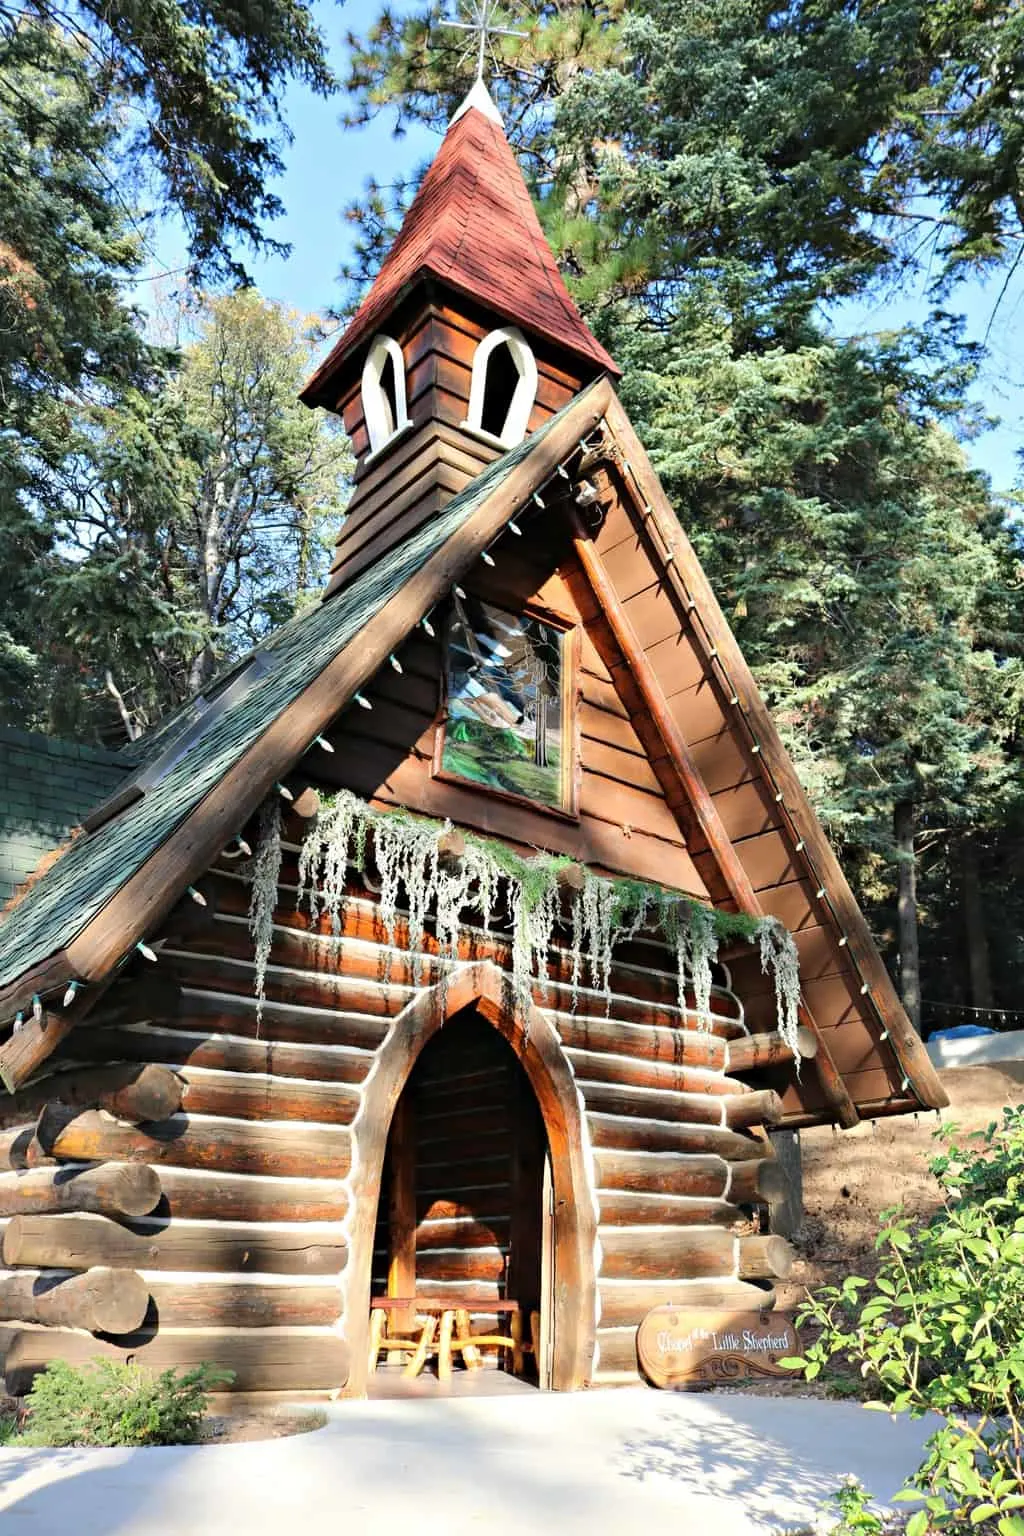 Skypark at Santa's Village near Lake Arrowhead, California is a year round Christmas theme park for people of all ages! Savor the nostalgia of an “Old World Christmas in the Woods” with family and friends. They offer mining for gold, visits with Santa & Mrs. Clause, zip lining, archery, indoor and outdoor rock climbing, crafts, daily story time, train rides and more. Discount tickets to Santa's Village are also available from time to time.